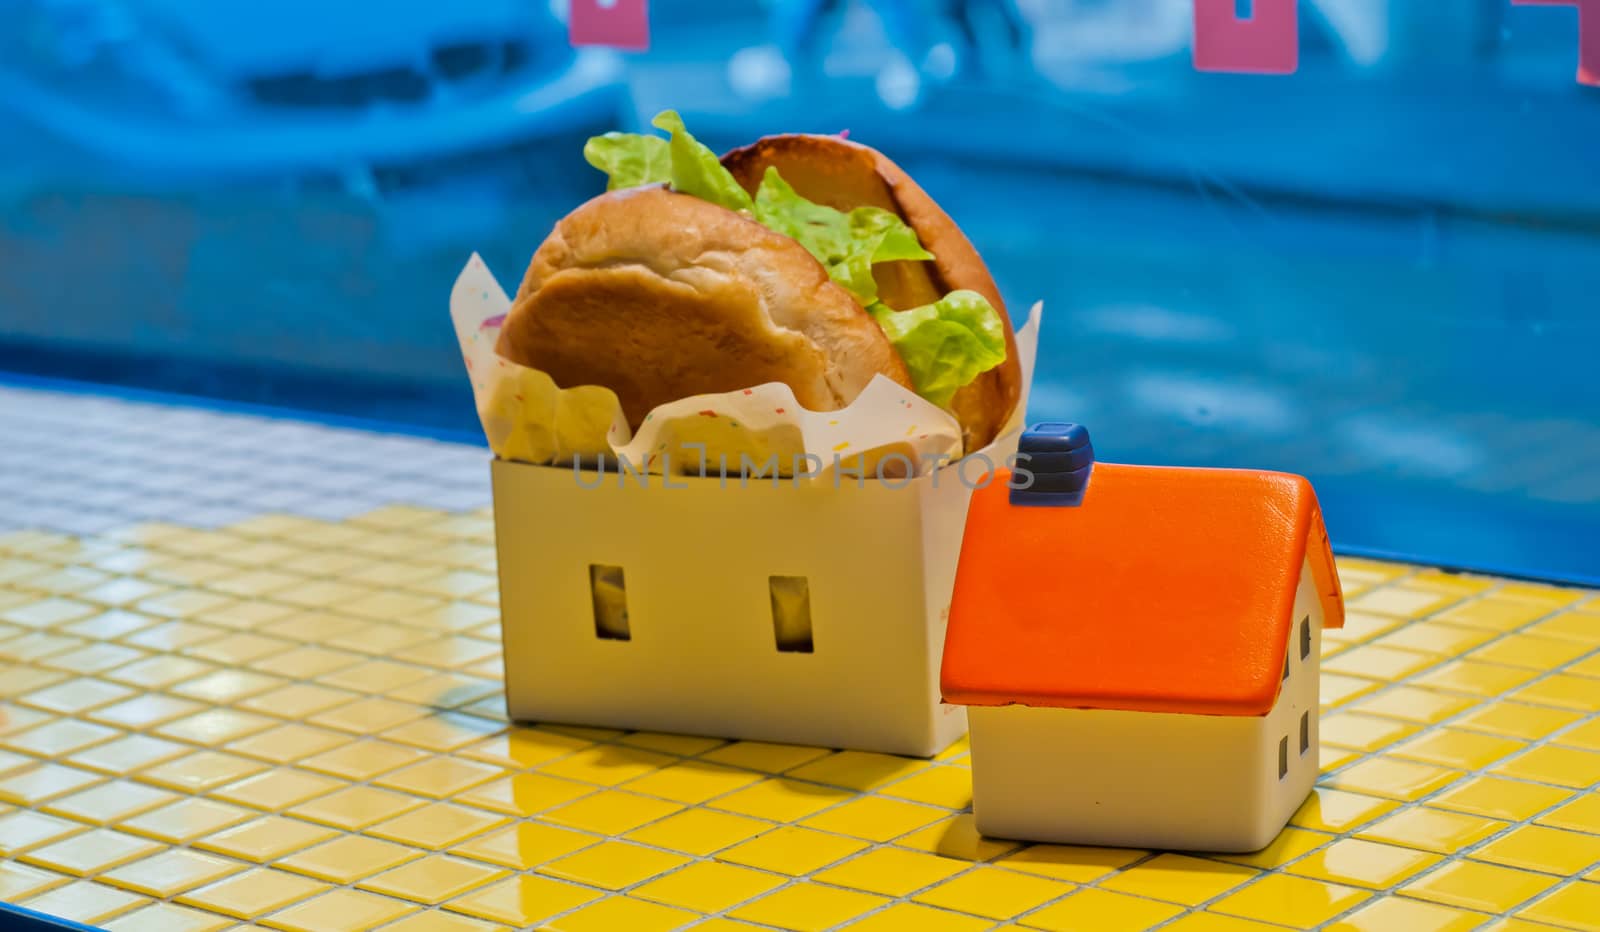 Freshly made burger fast food with soft toy orange house model by eyeofpaul